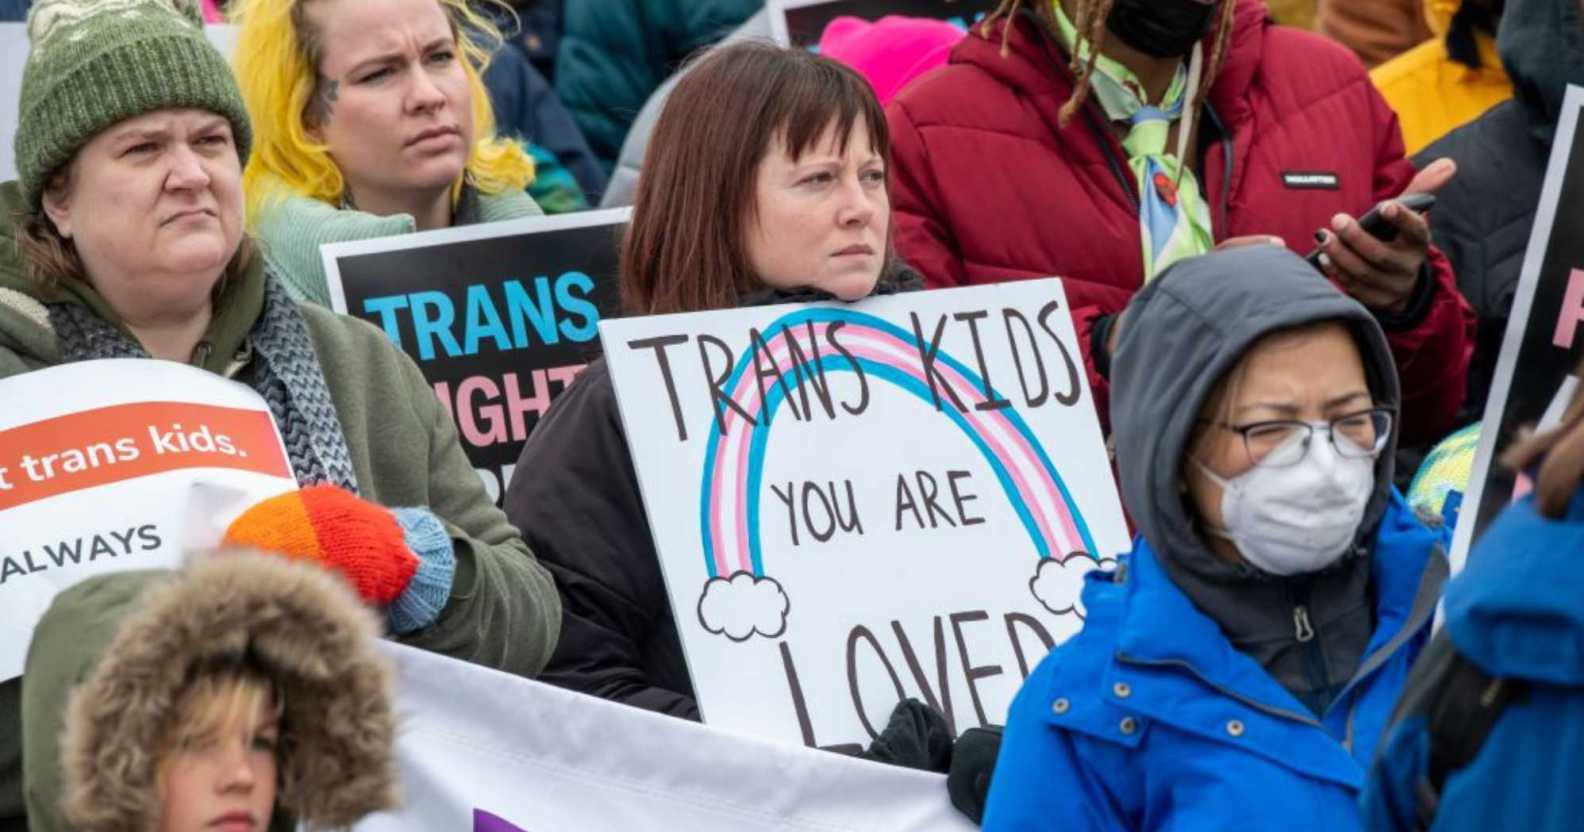 Demonstrators oppose anti-trans laws in the US